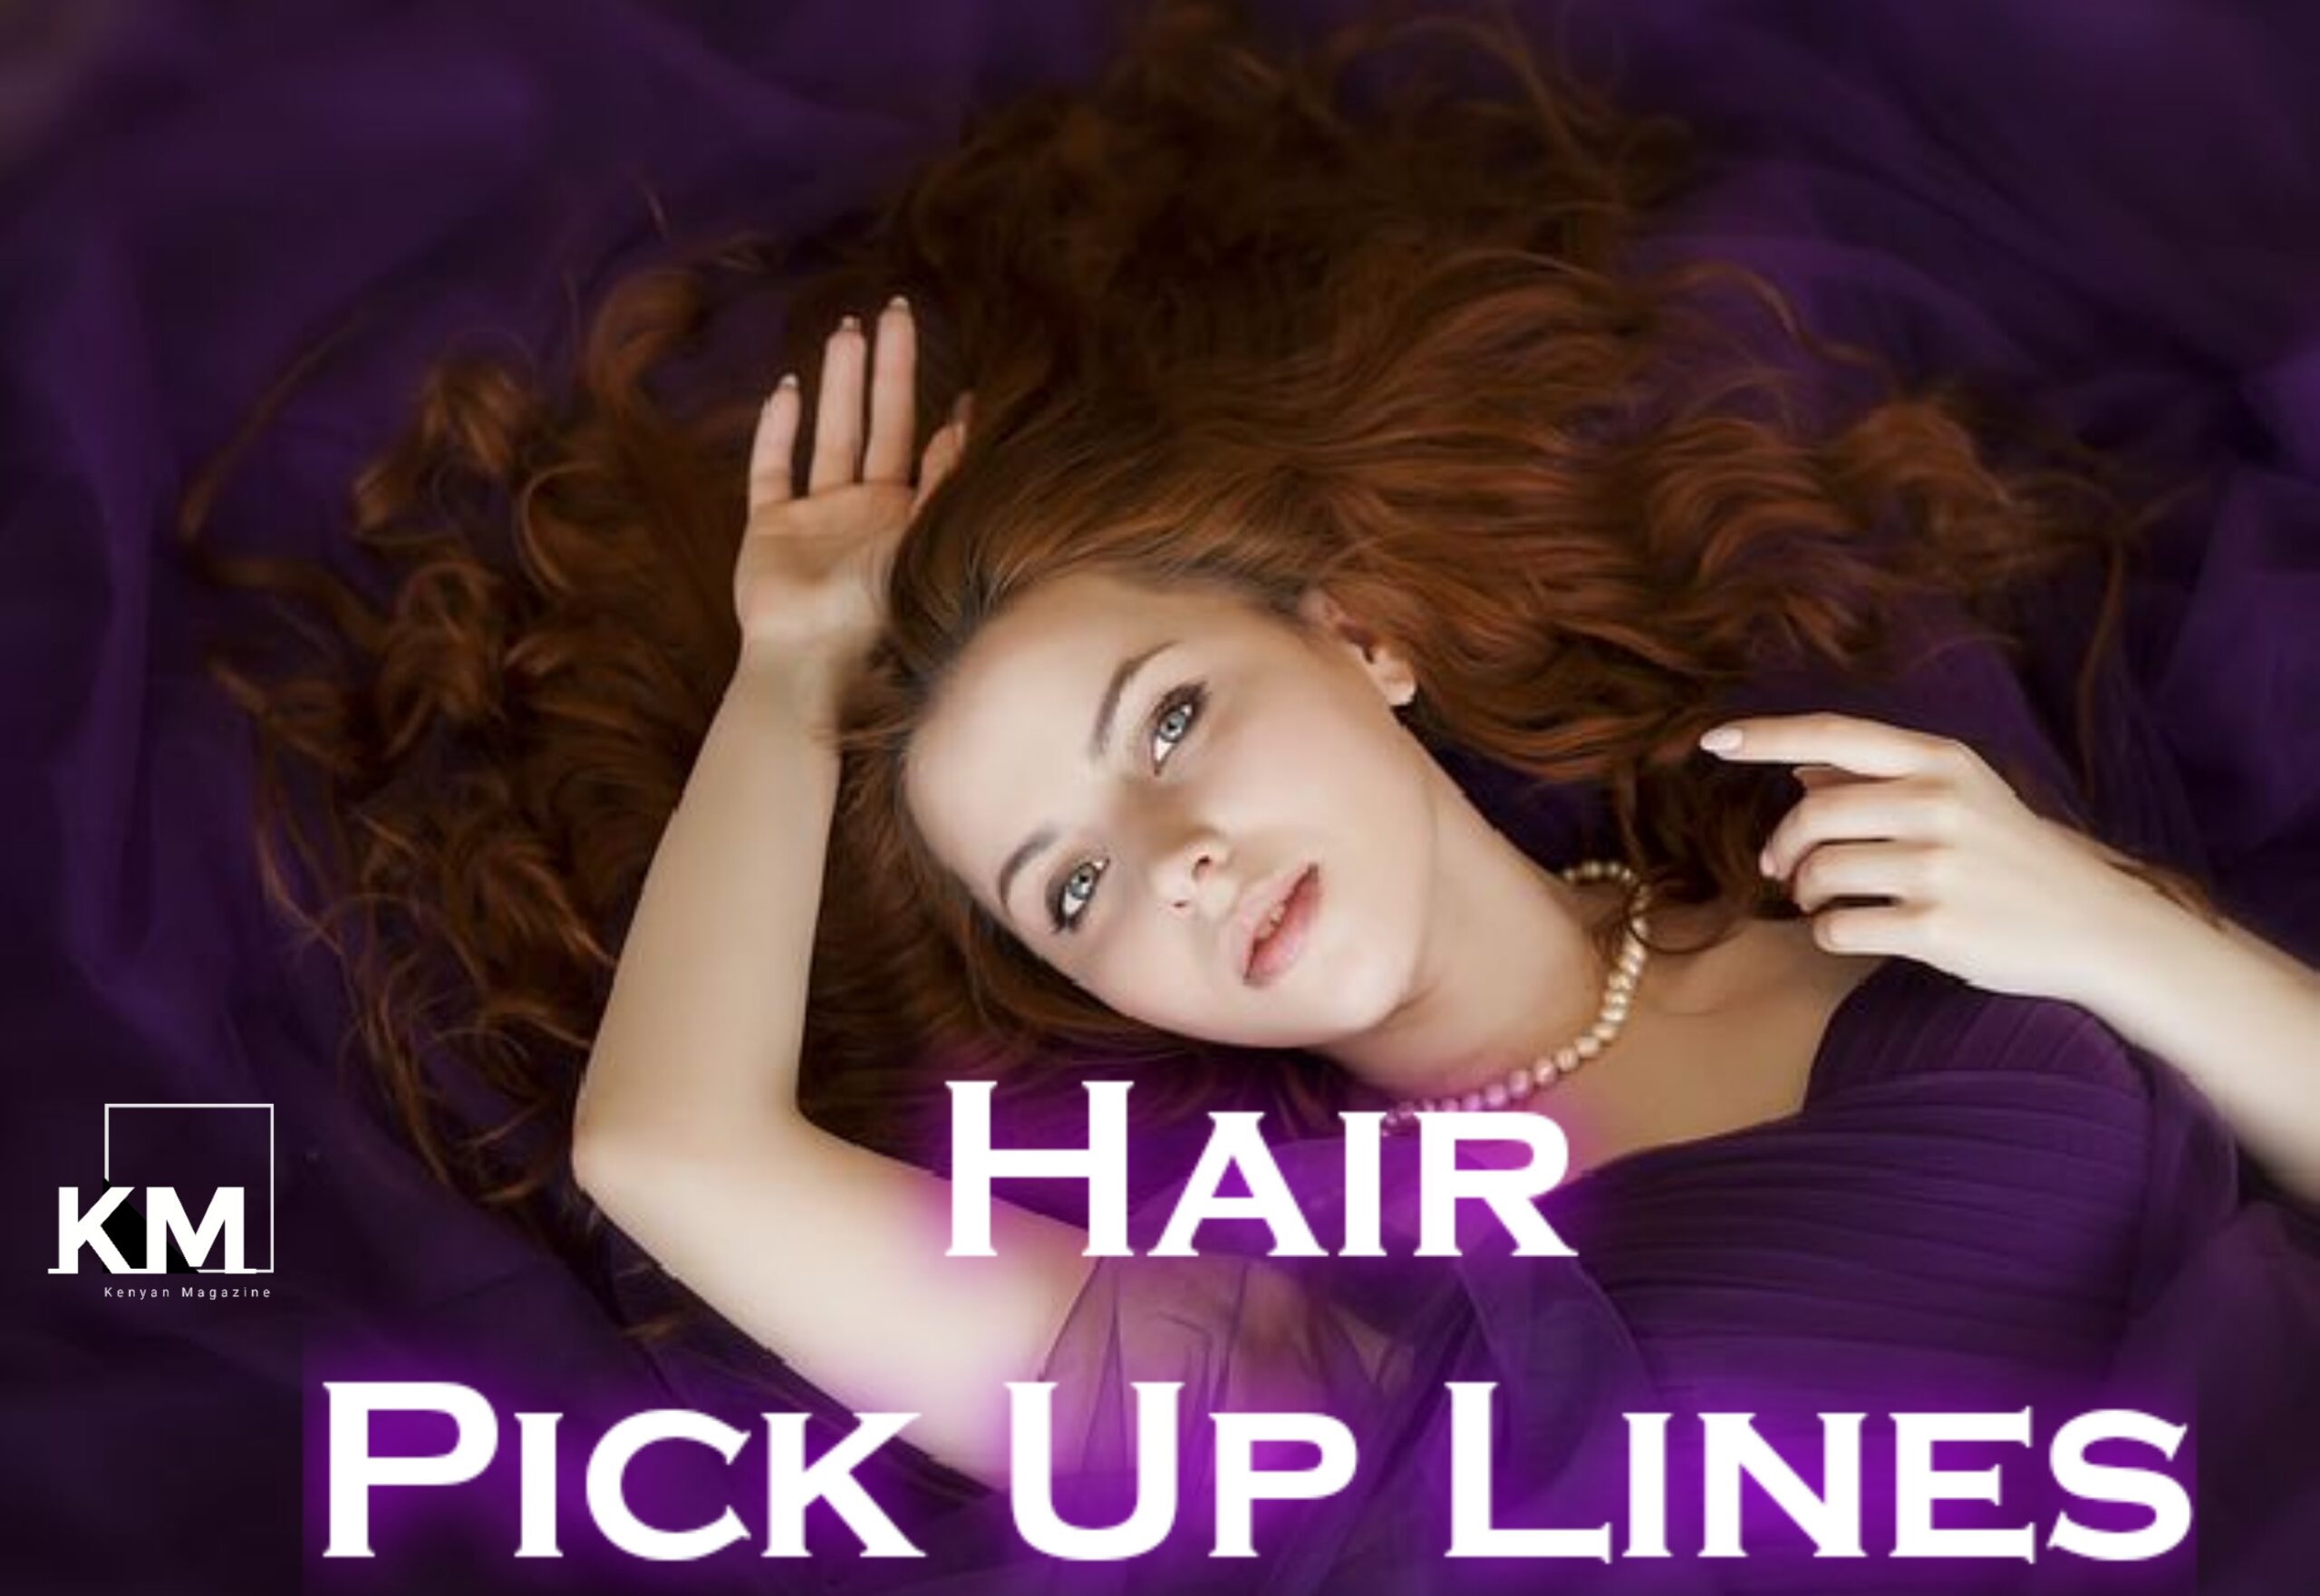 Hair Pick up lines